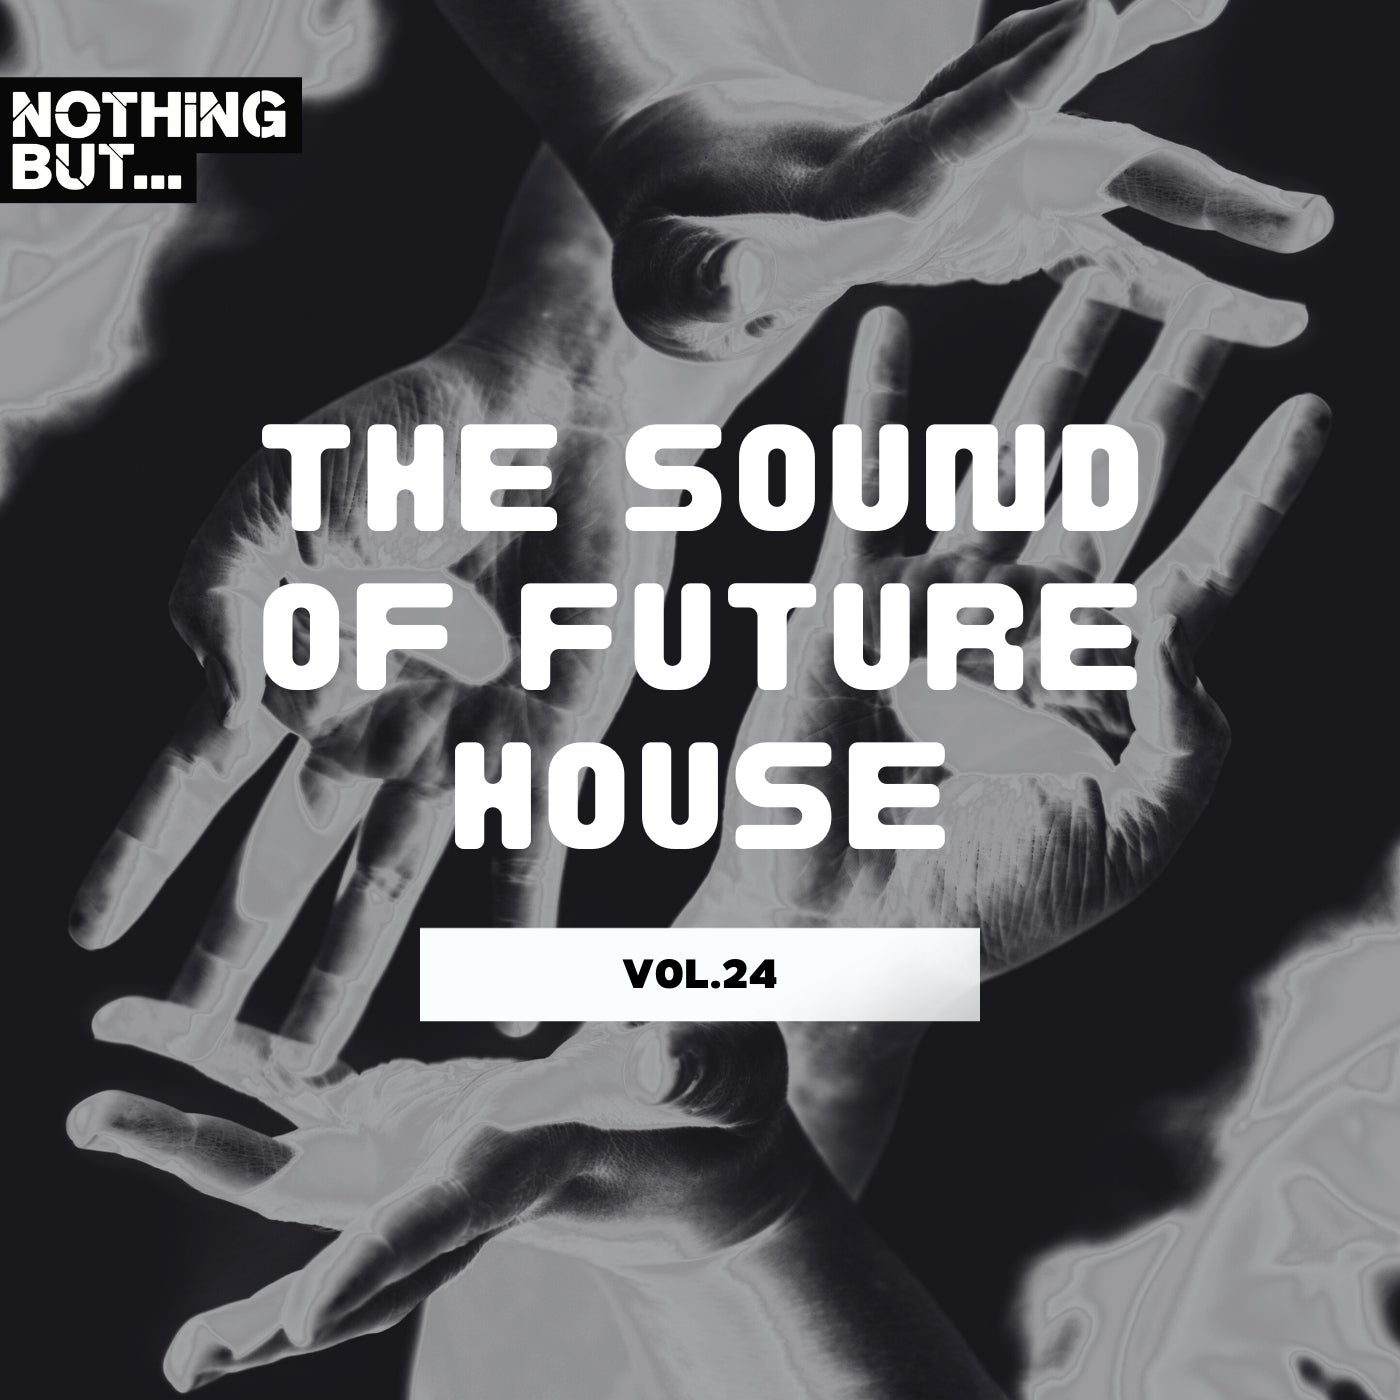 Nothing But... The Sound of Future House, Vol. 24